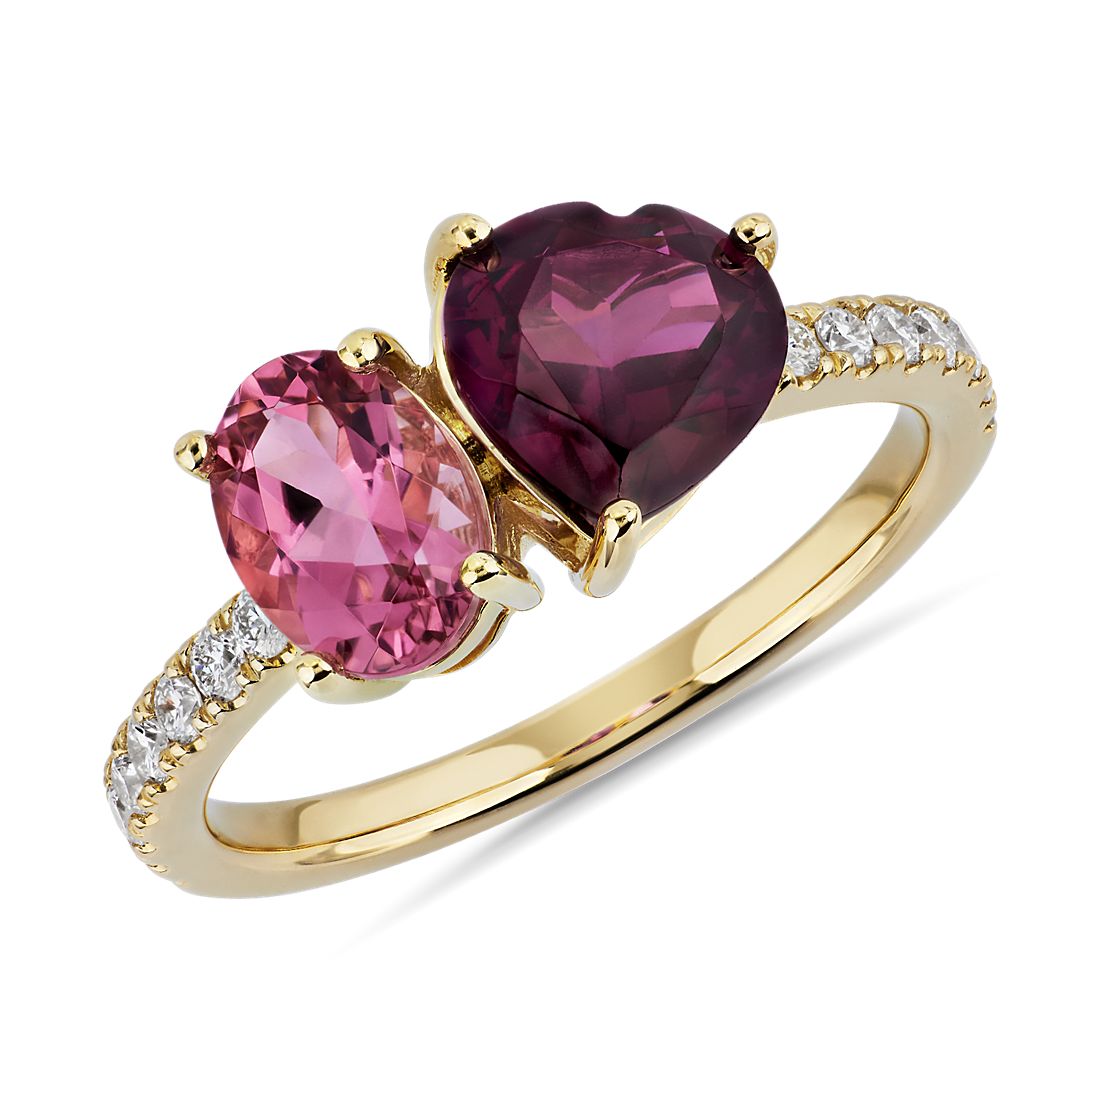 Pink Tourmaline and Rhodolite Two Stone Ring in 14k Yellow Gold